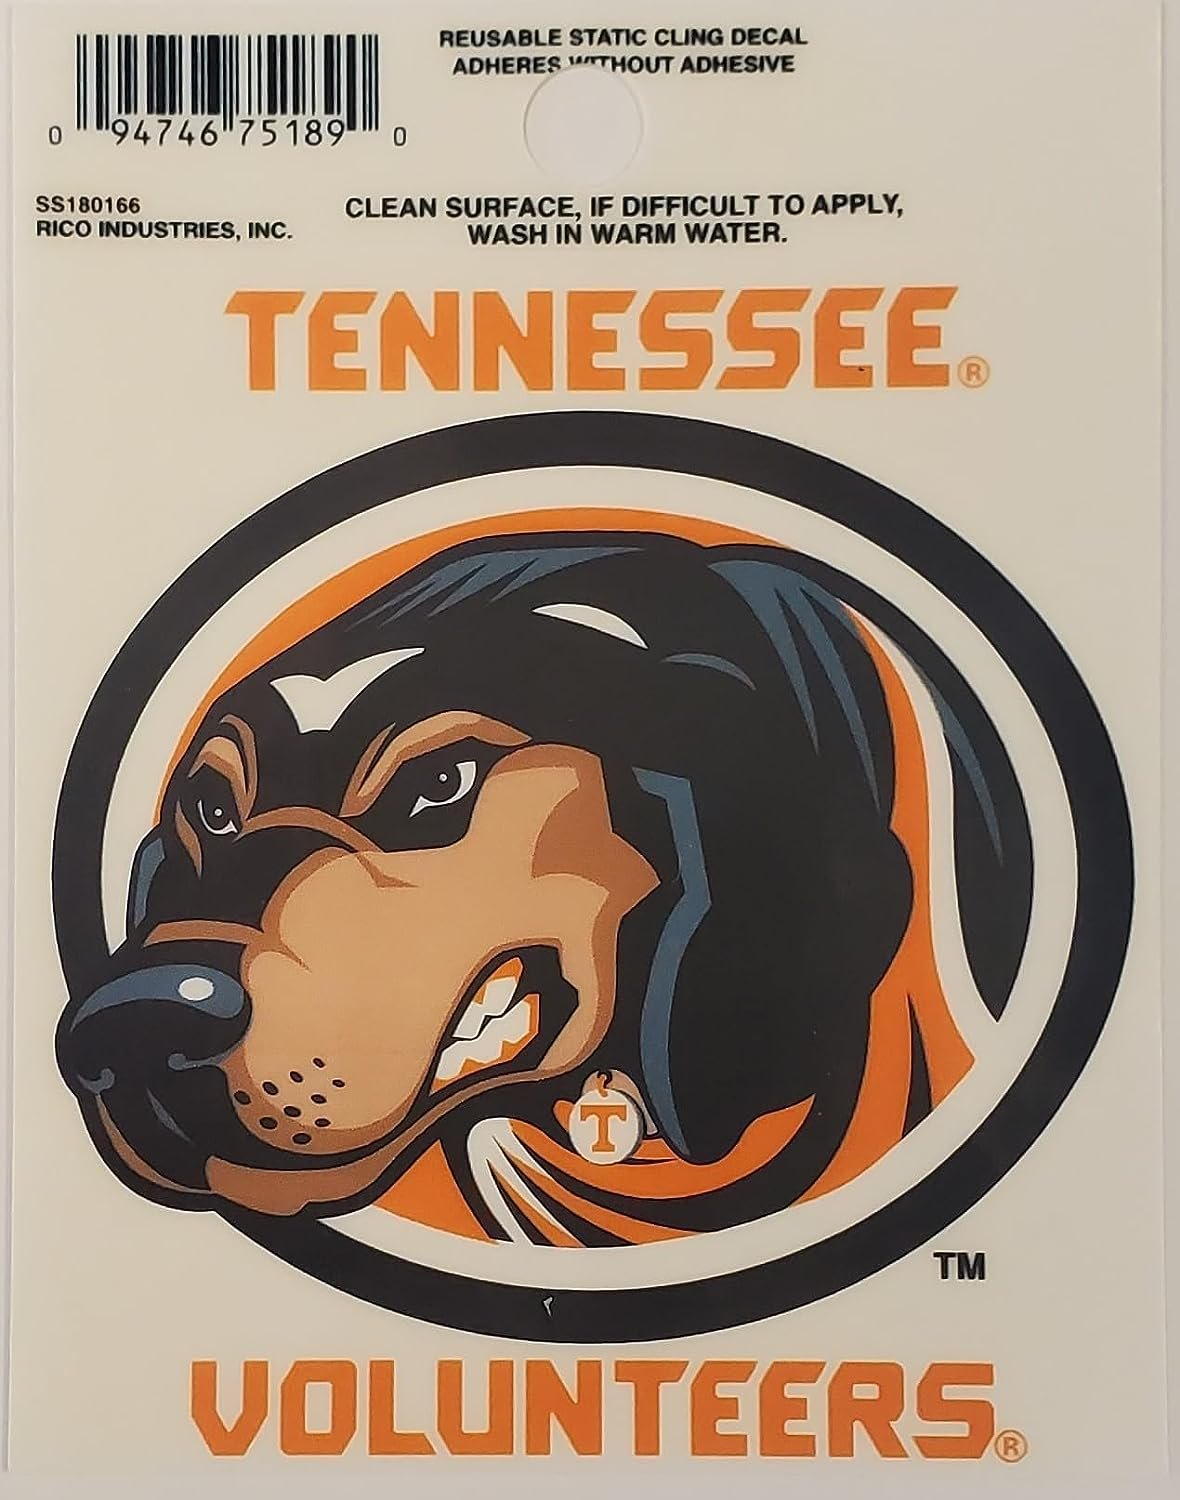 University of Tennessee Volunteers 3 Inch Static Cling Decal Sticker, Mascot Design